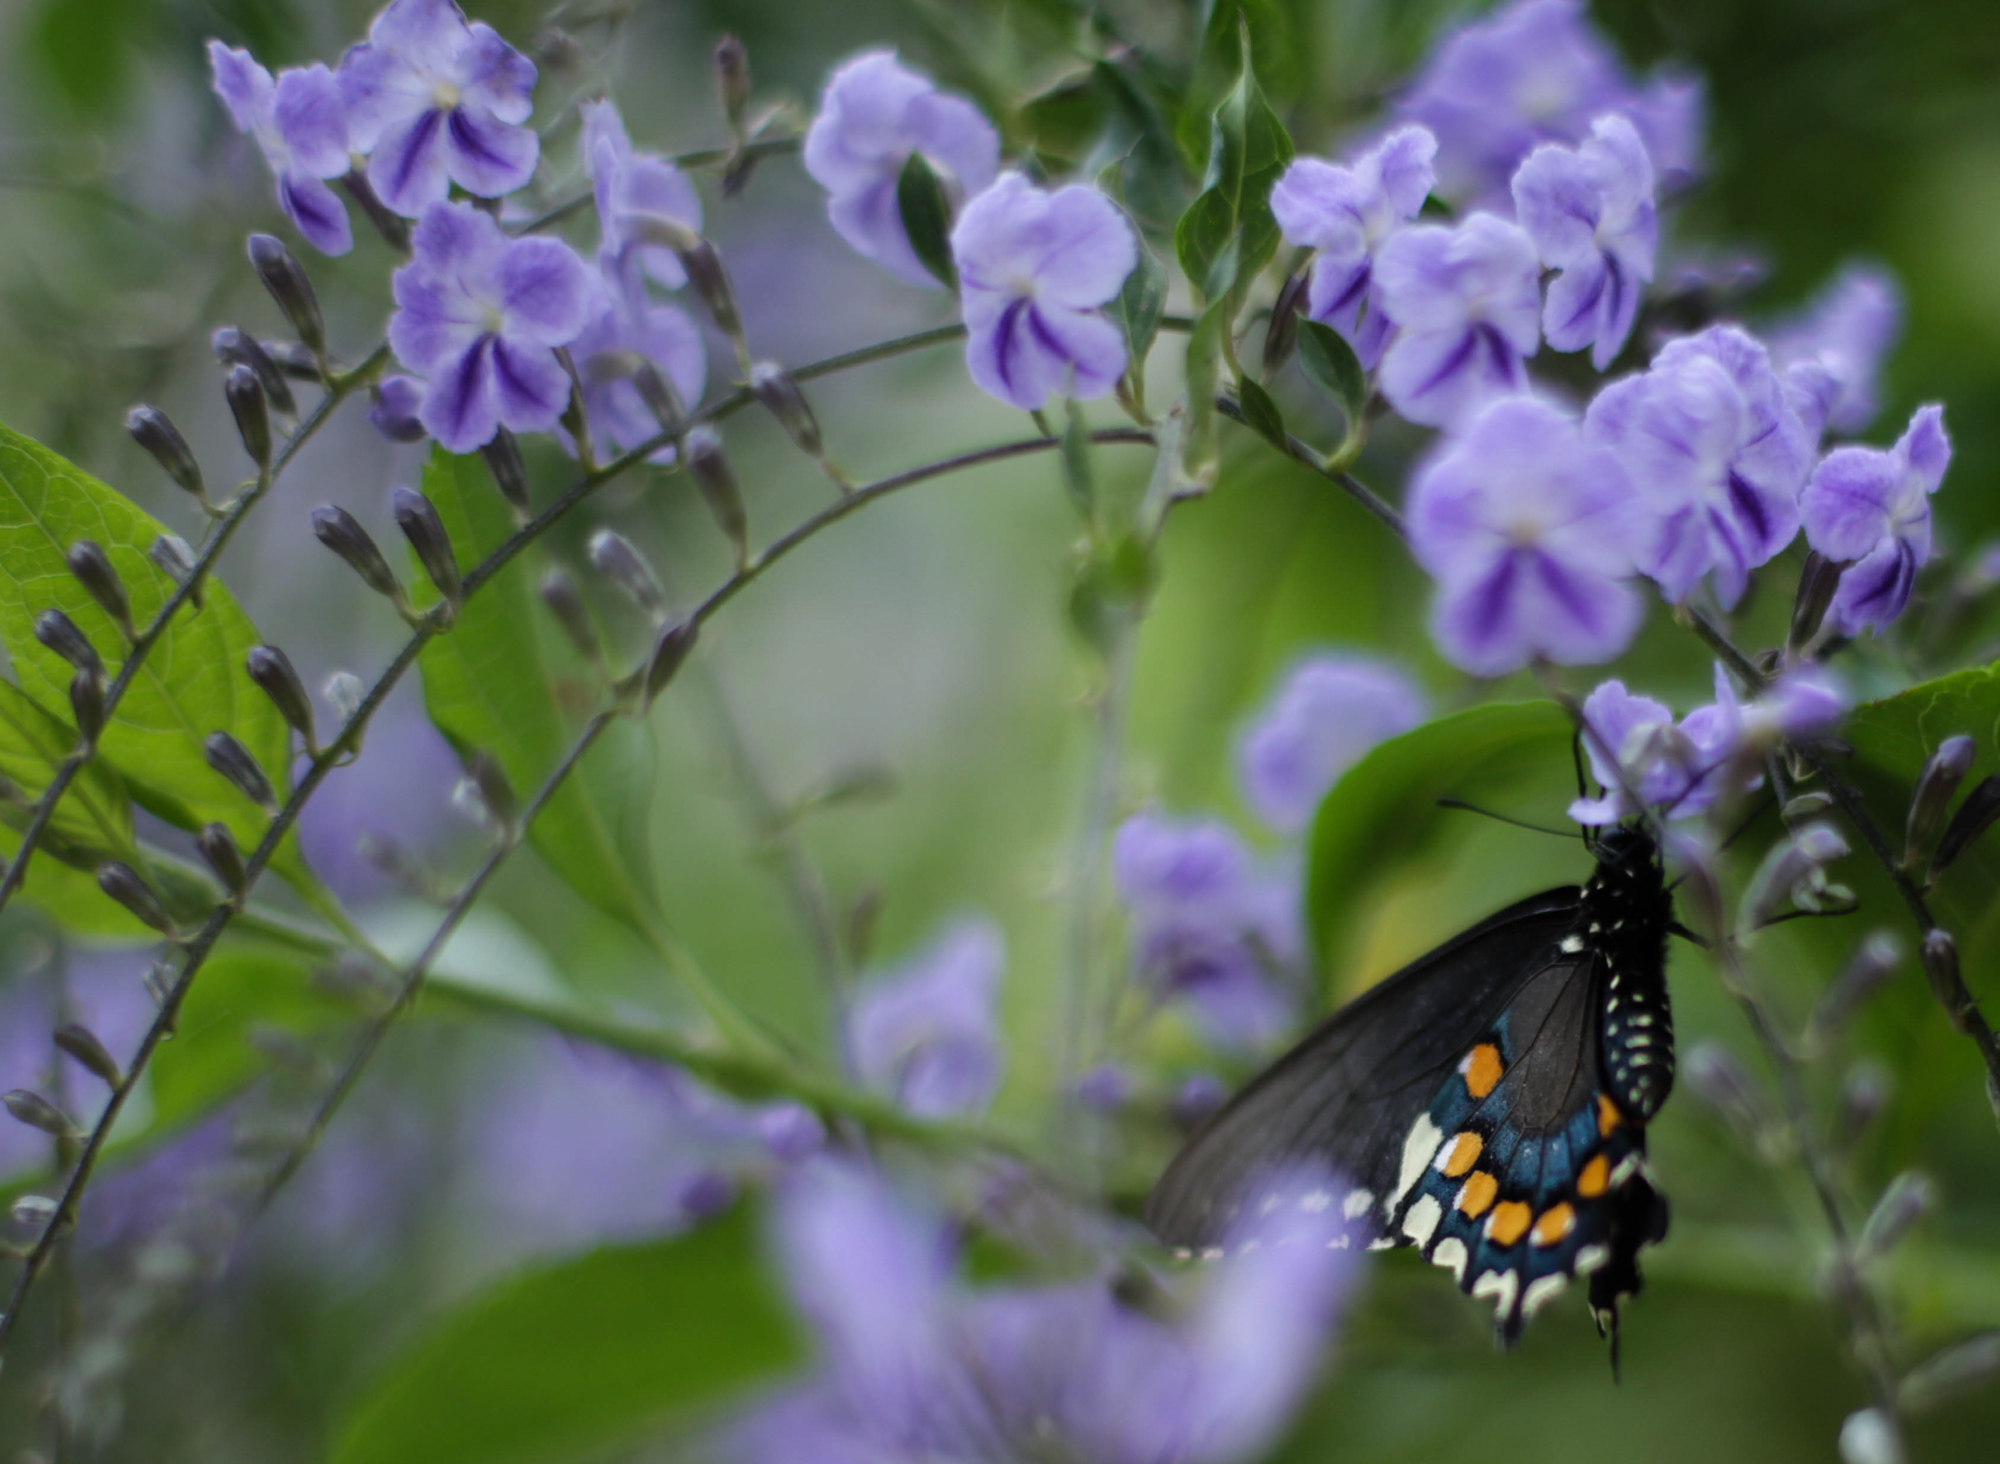  The Pipeline/Blue Swallowtail Butterfly (Battus Philenor) was one of the many speicies of native Californian butterflies on display at the Butterfly Pavilion outside the National History Museum. The Butterfly Pavilion was one of the many exhibits on